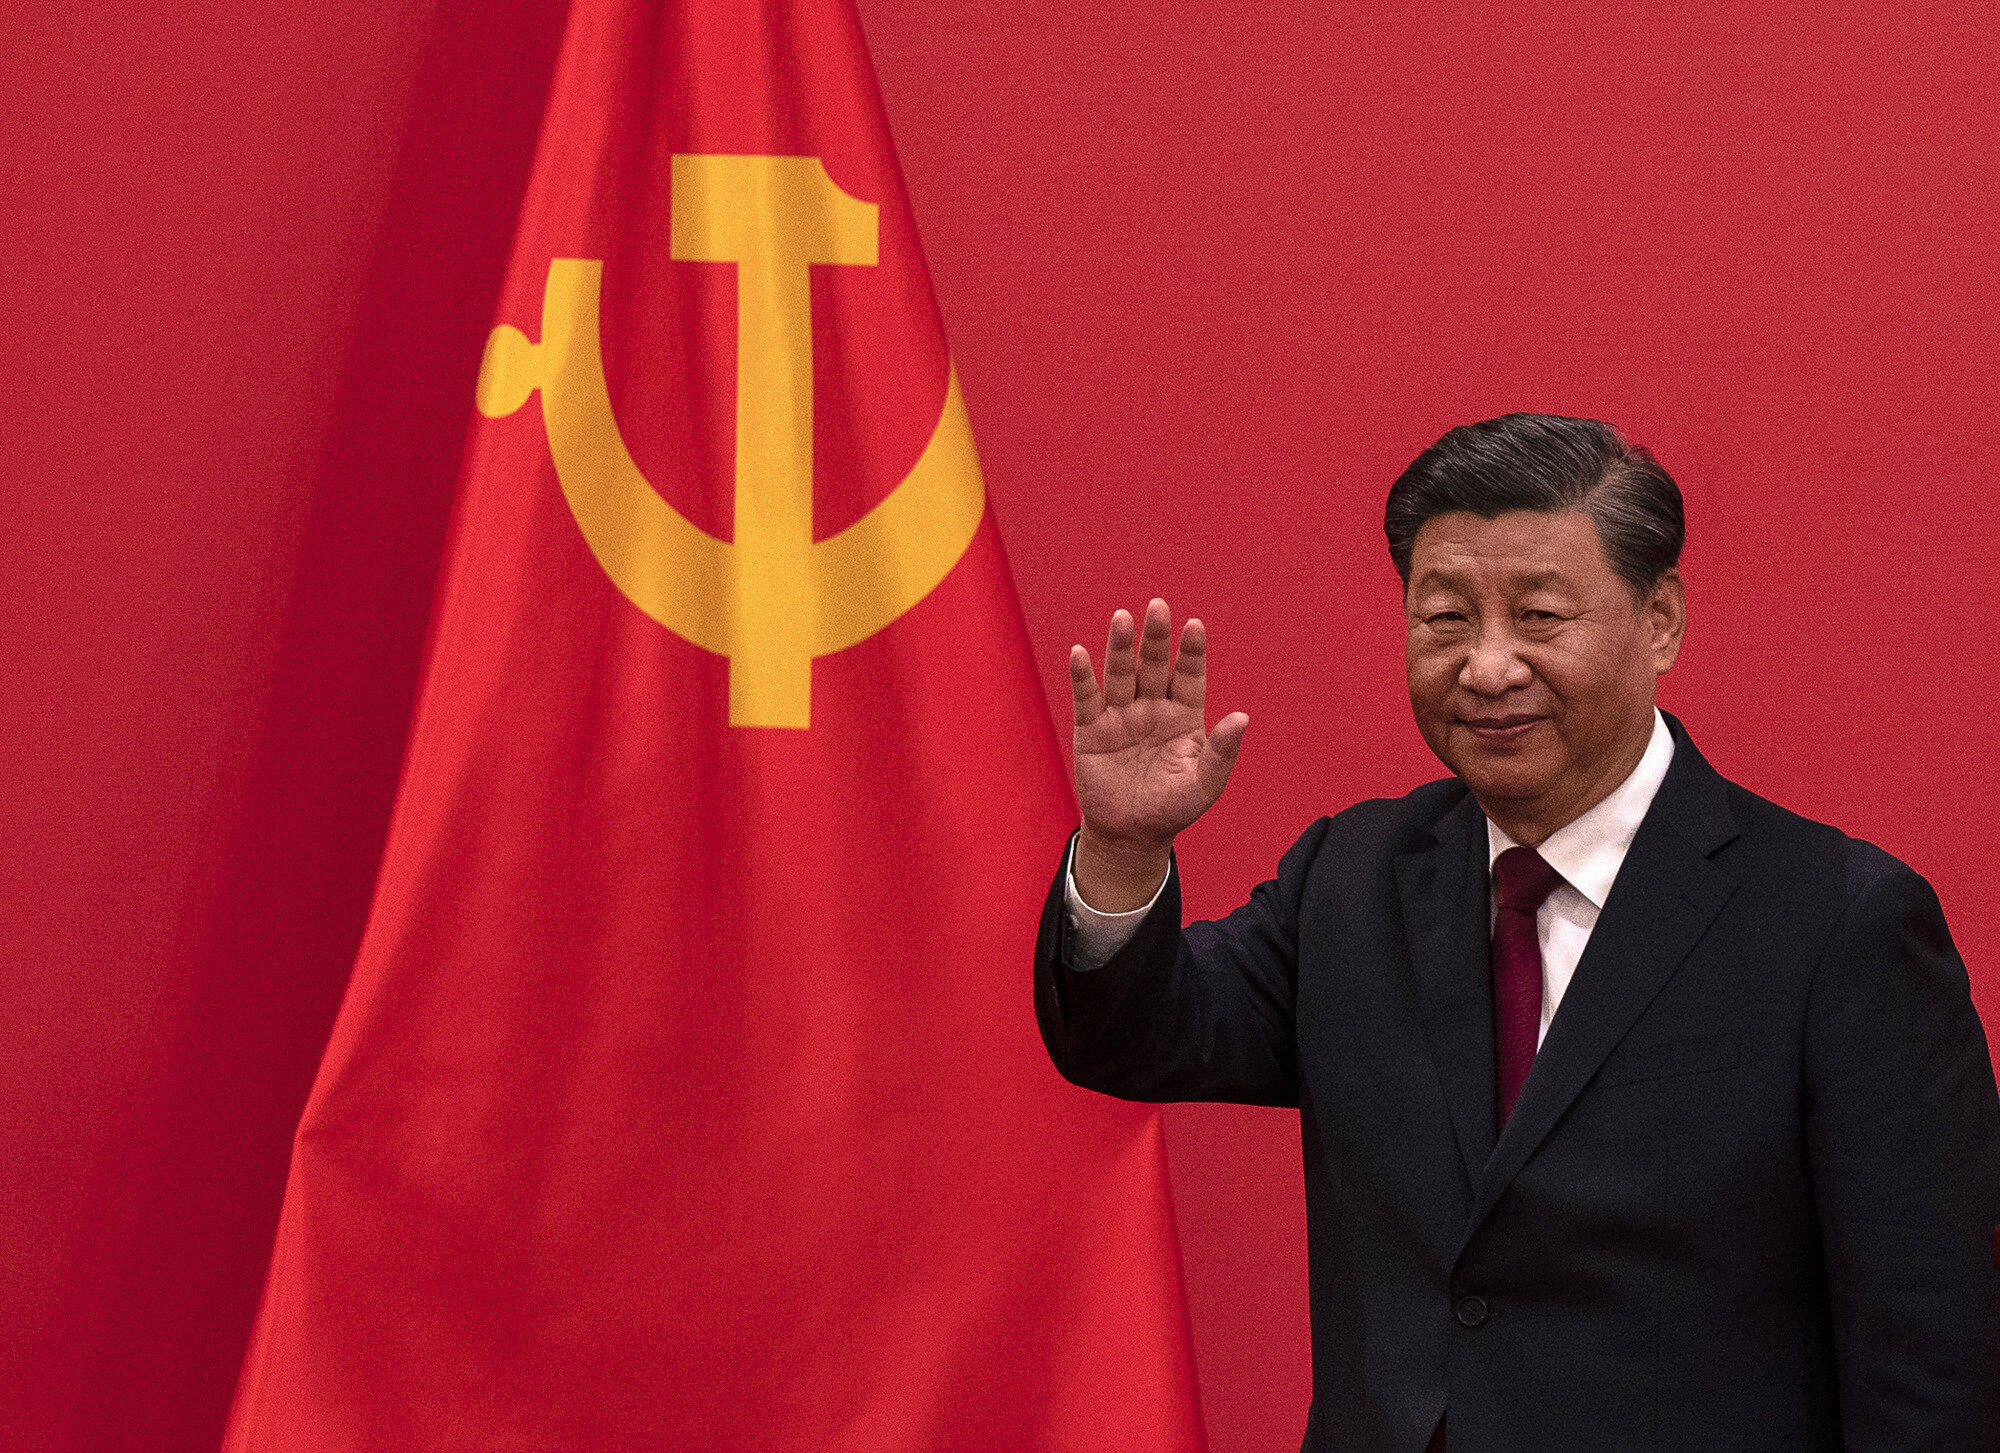 Xi Jinping discreetly protects China from sanctions